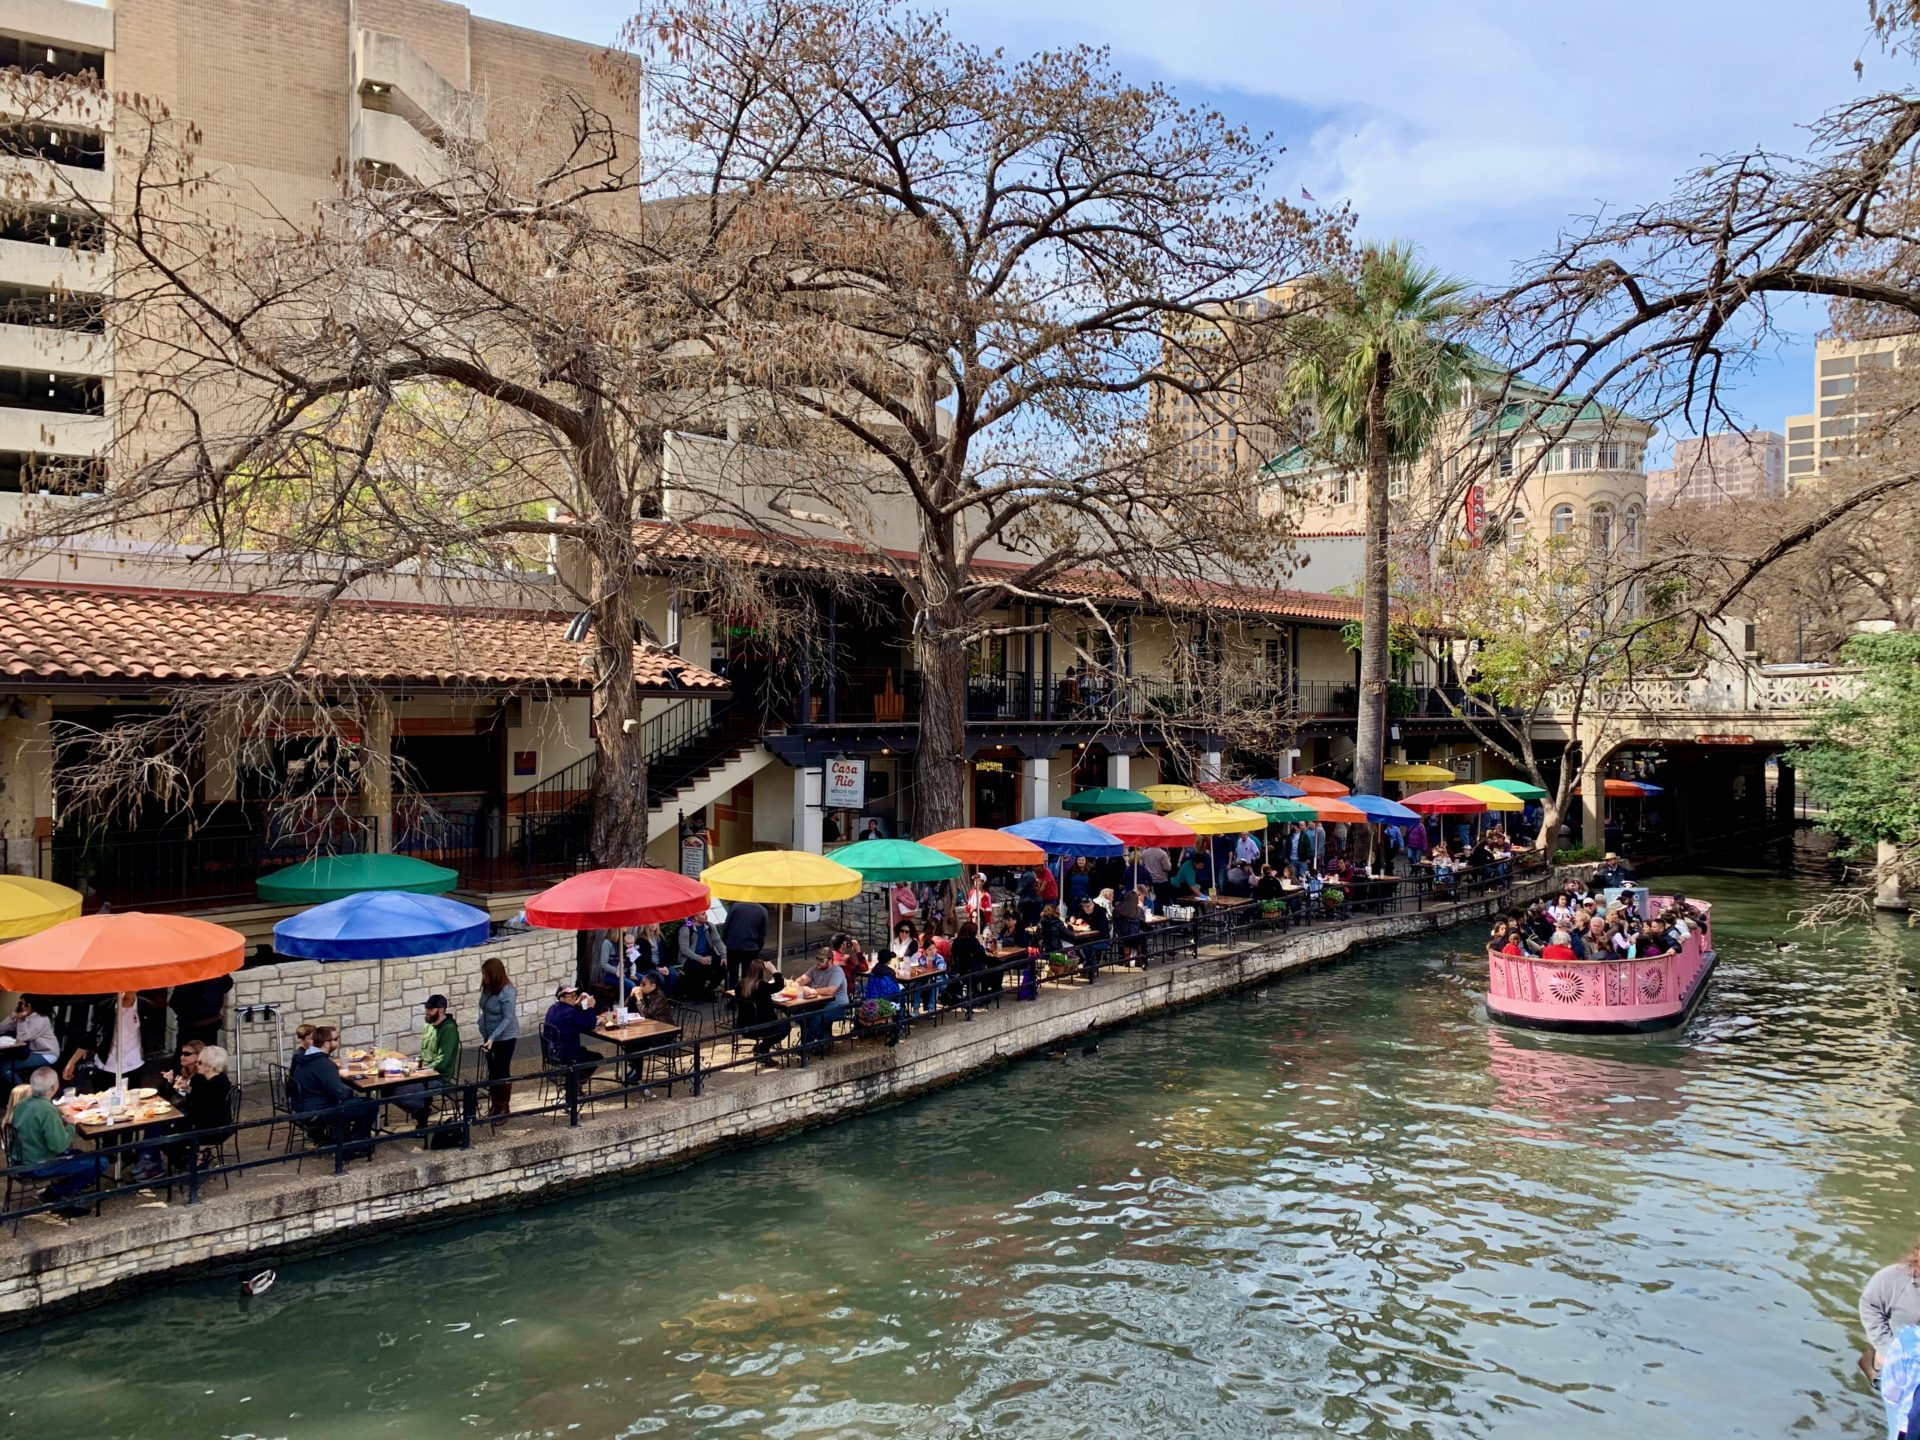 The Oldest Restaurant on the Riverwalk - Traveling with JC